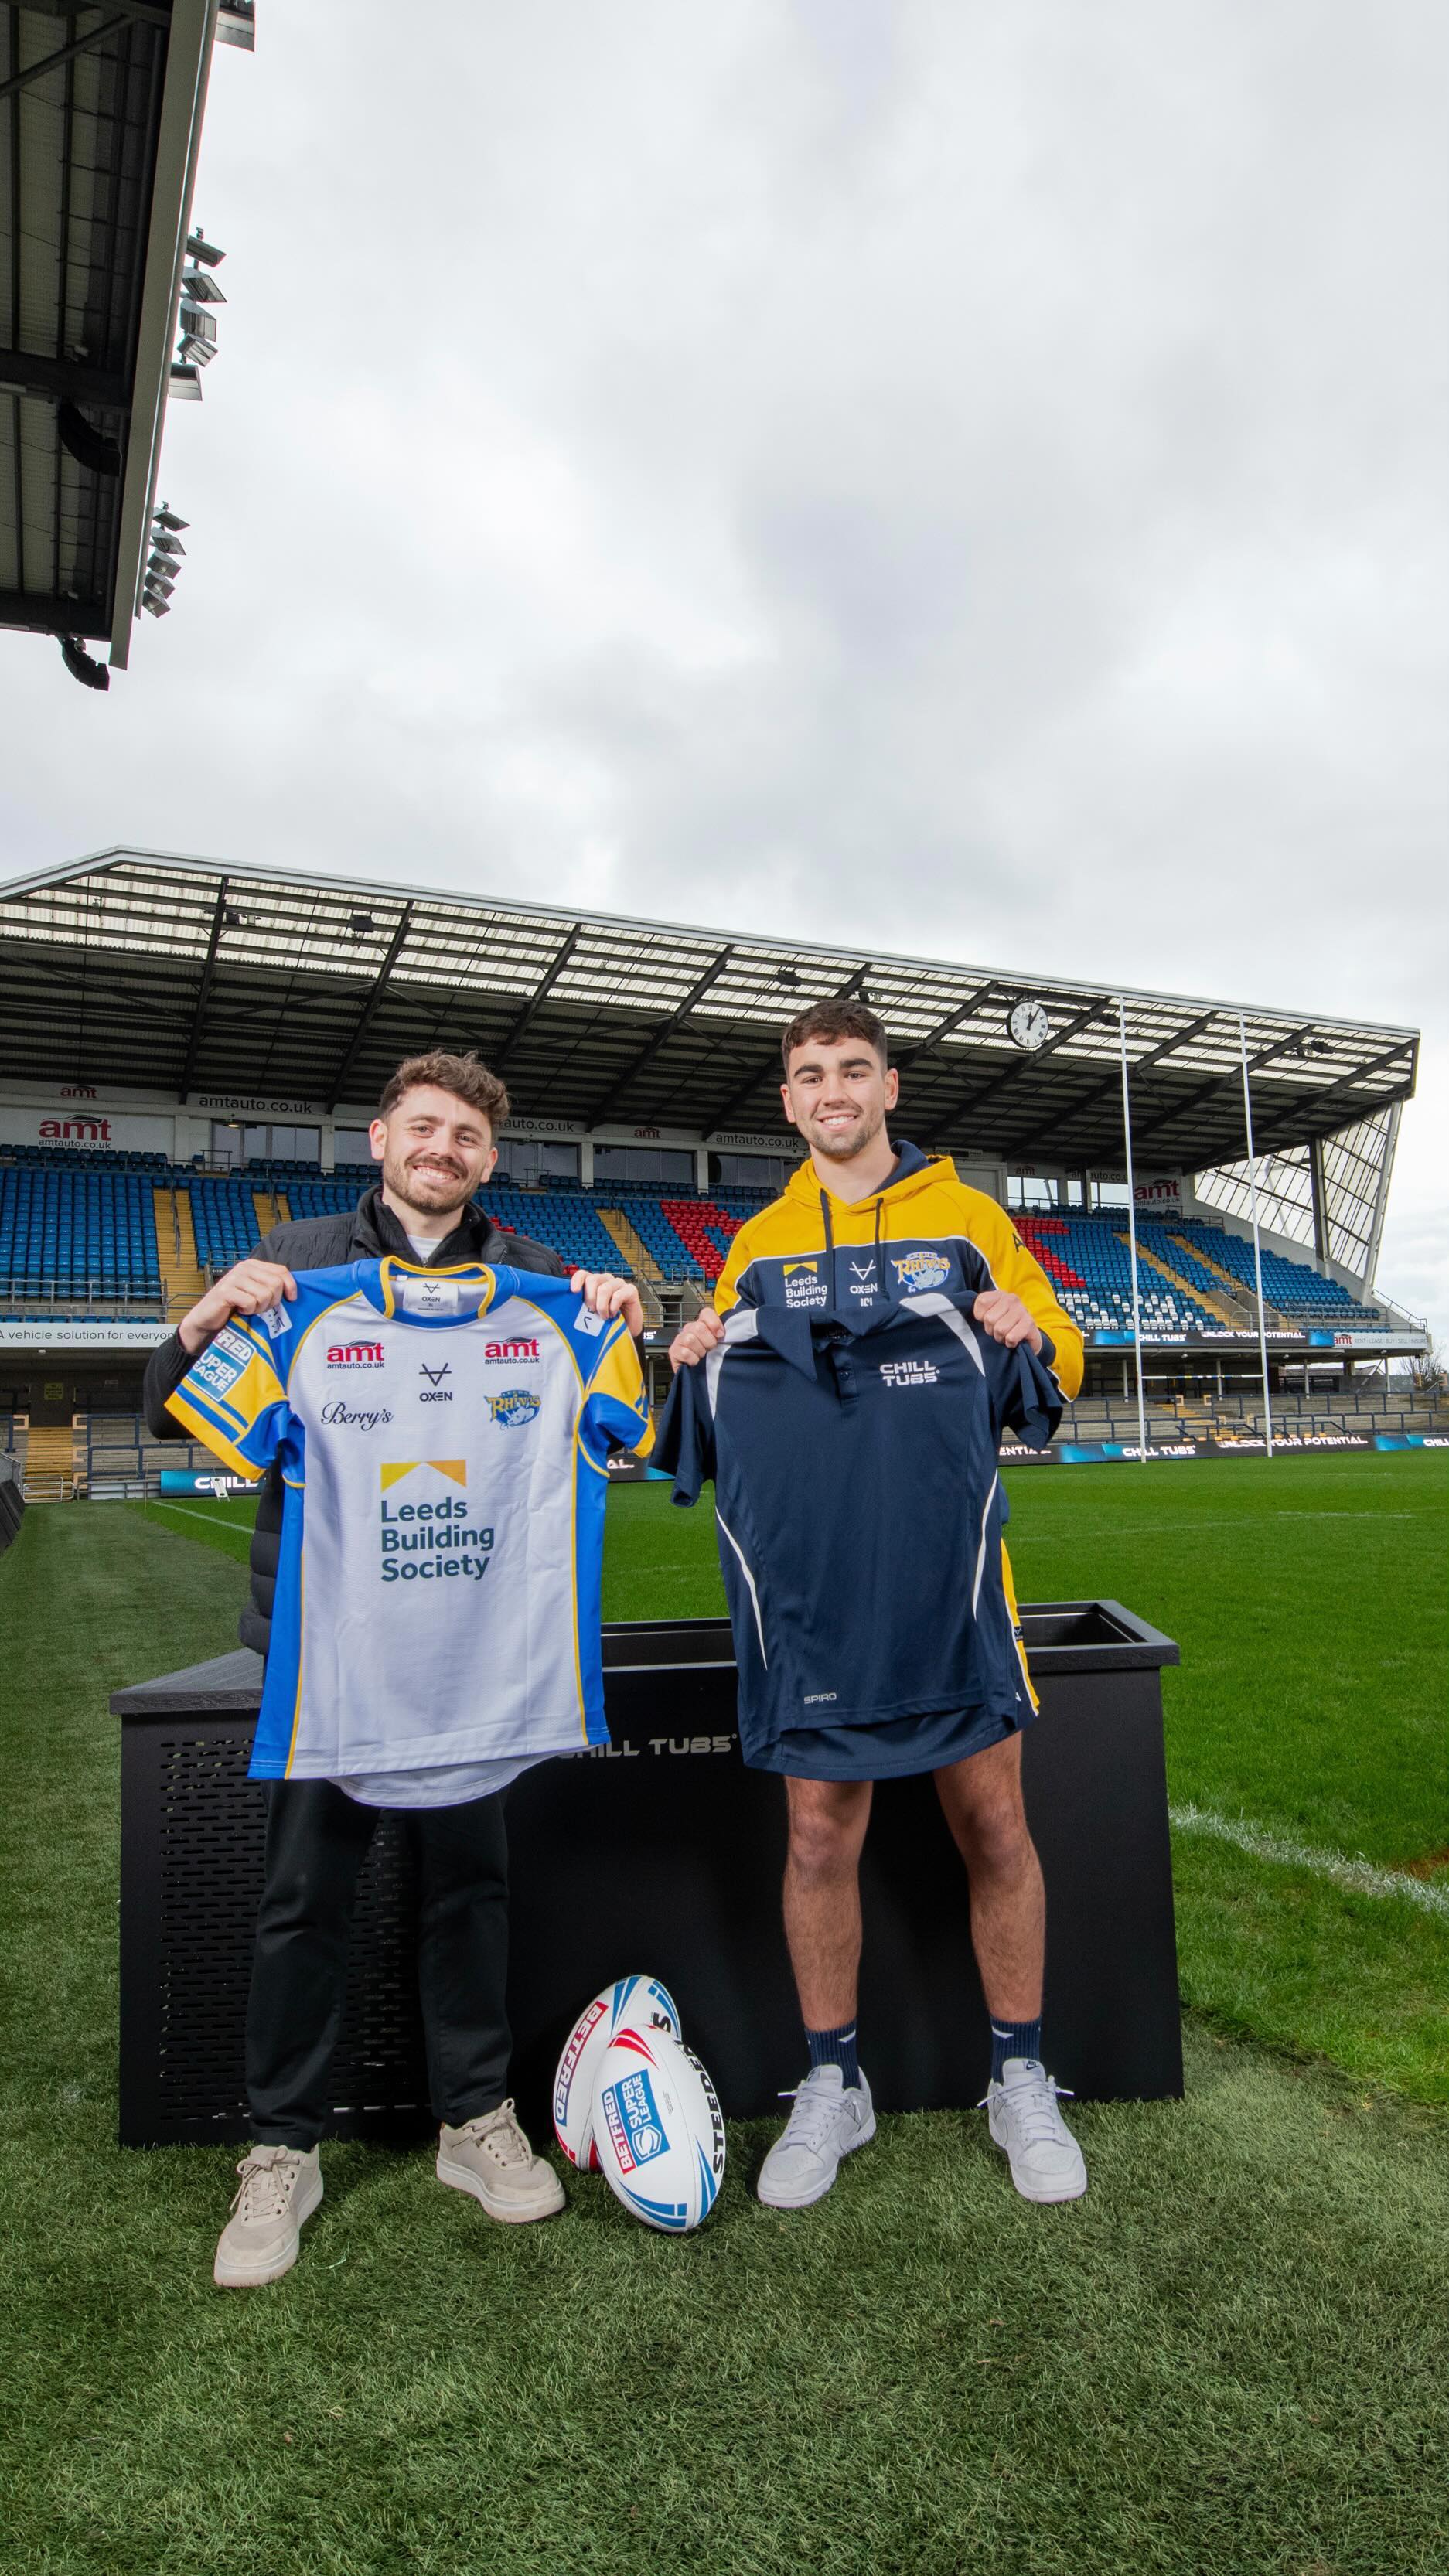      CHILL TUBS X LEEDS RHINOS       We   re thrilled to announce that we have partnered with @leedsrhinos to help them tackle their recovery for the season ahead            We   re incredibly excited about this partnership and we can   t wait to share more with you about their journey with Chill Tubs.   Stay tuned for updates and get ready to witness the power of cold water therapy          #leedsrhinos #rugby #rugbyleague #chilltub #chilltubs #icebath #icebaths #coldwater #coldplunge #coldplungetherapy